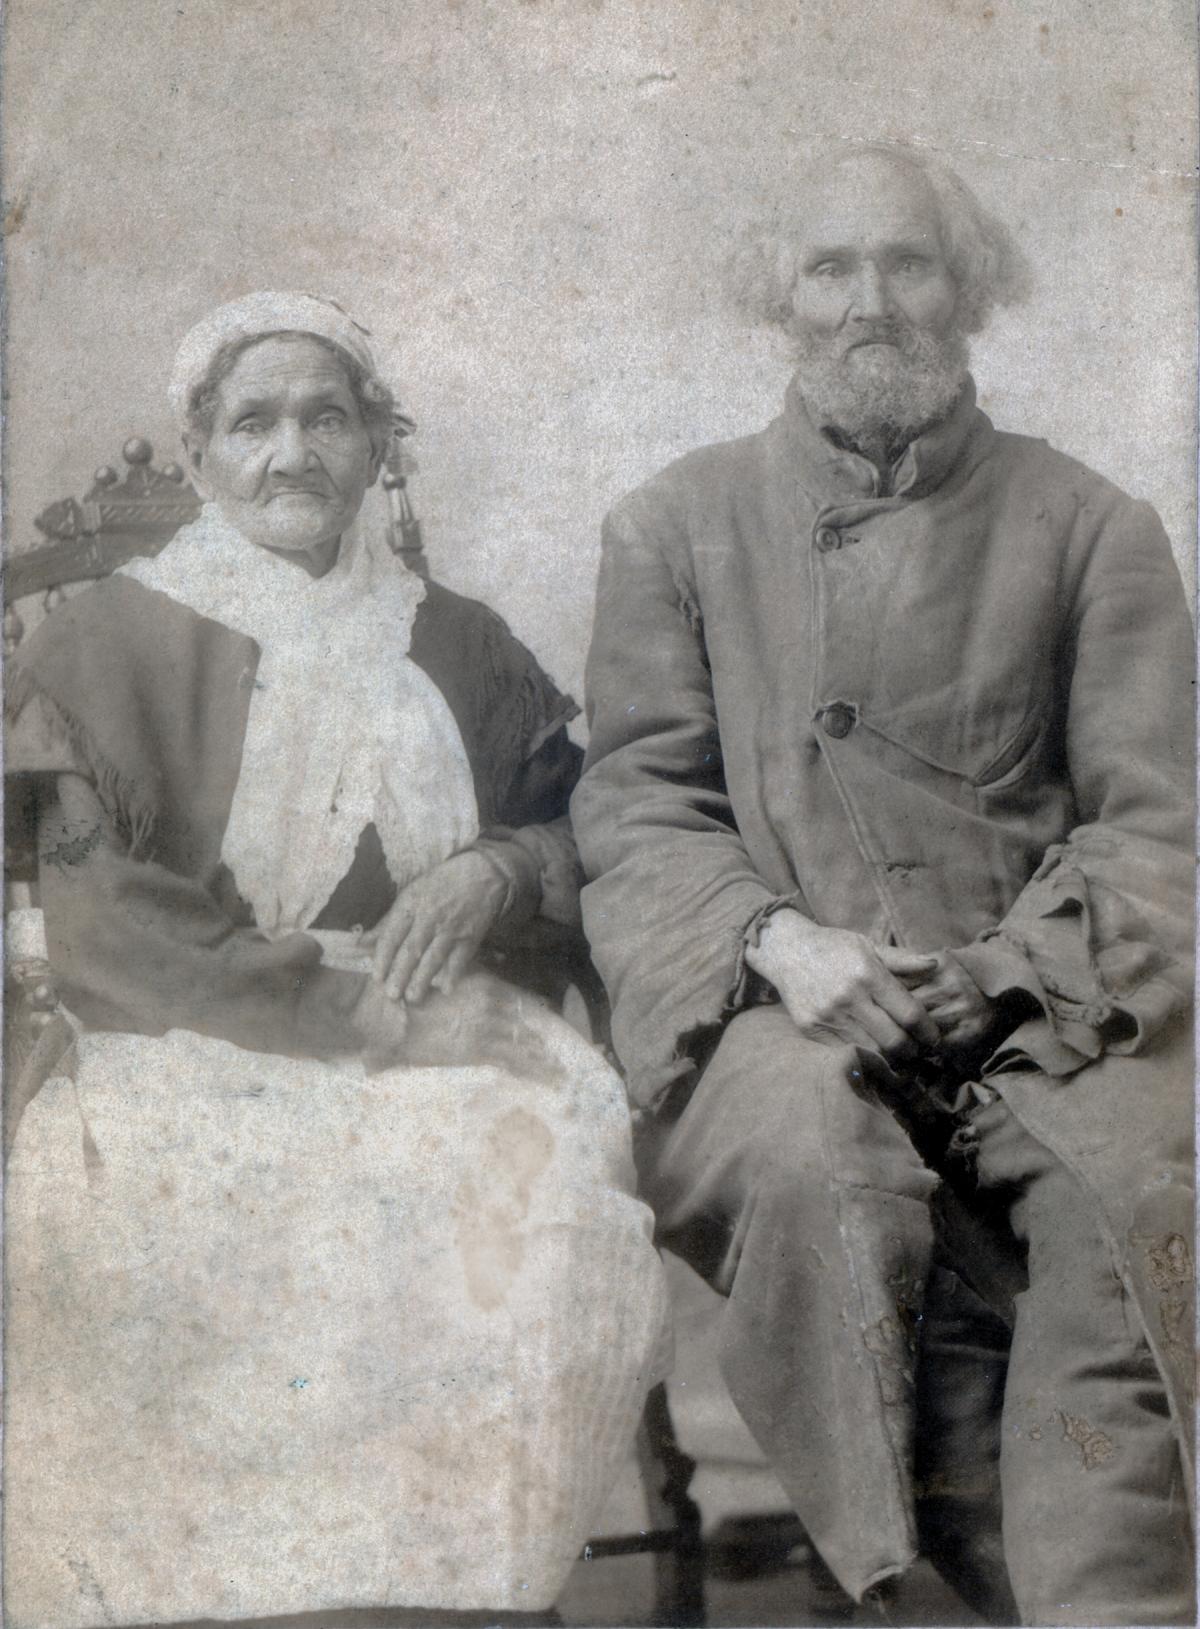 Elderly Hannah and Aaron sit side by side. Hannah in a white lace dress and cap and dark cape, Aaron wearing a gray coat and trousers